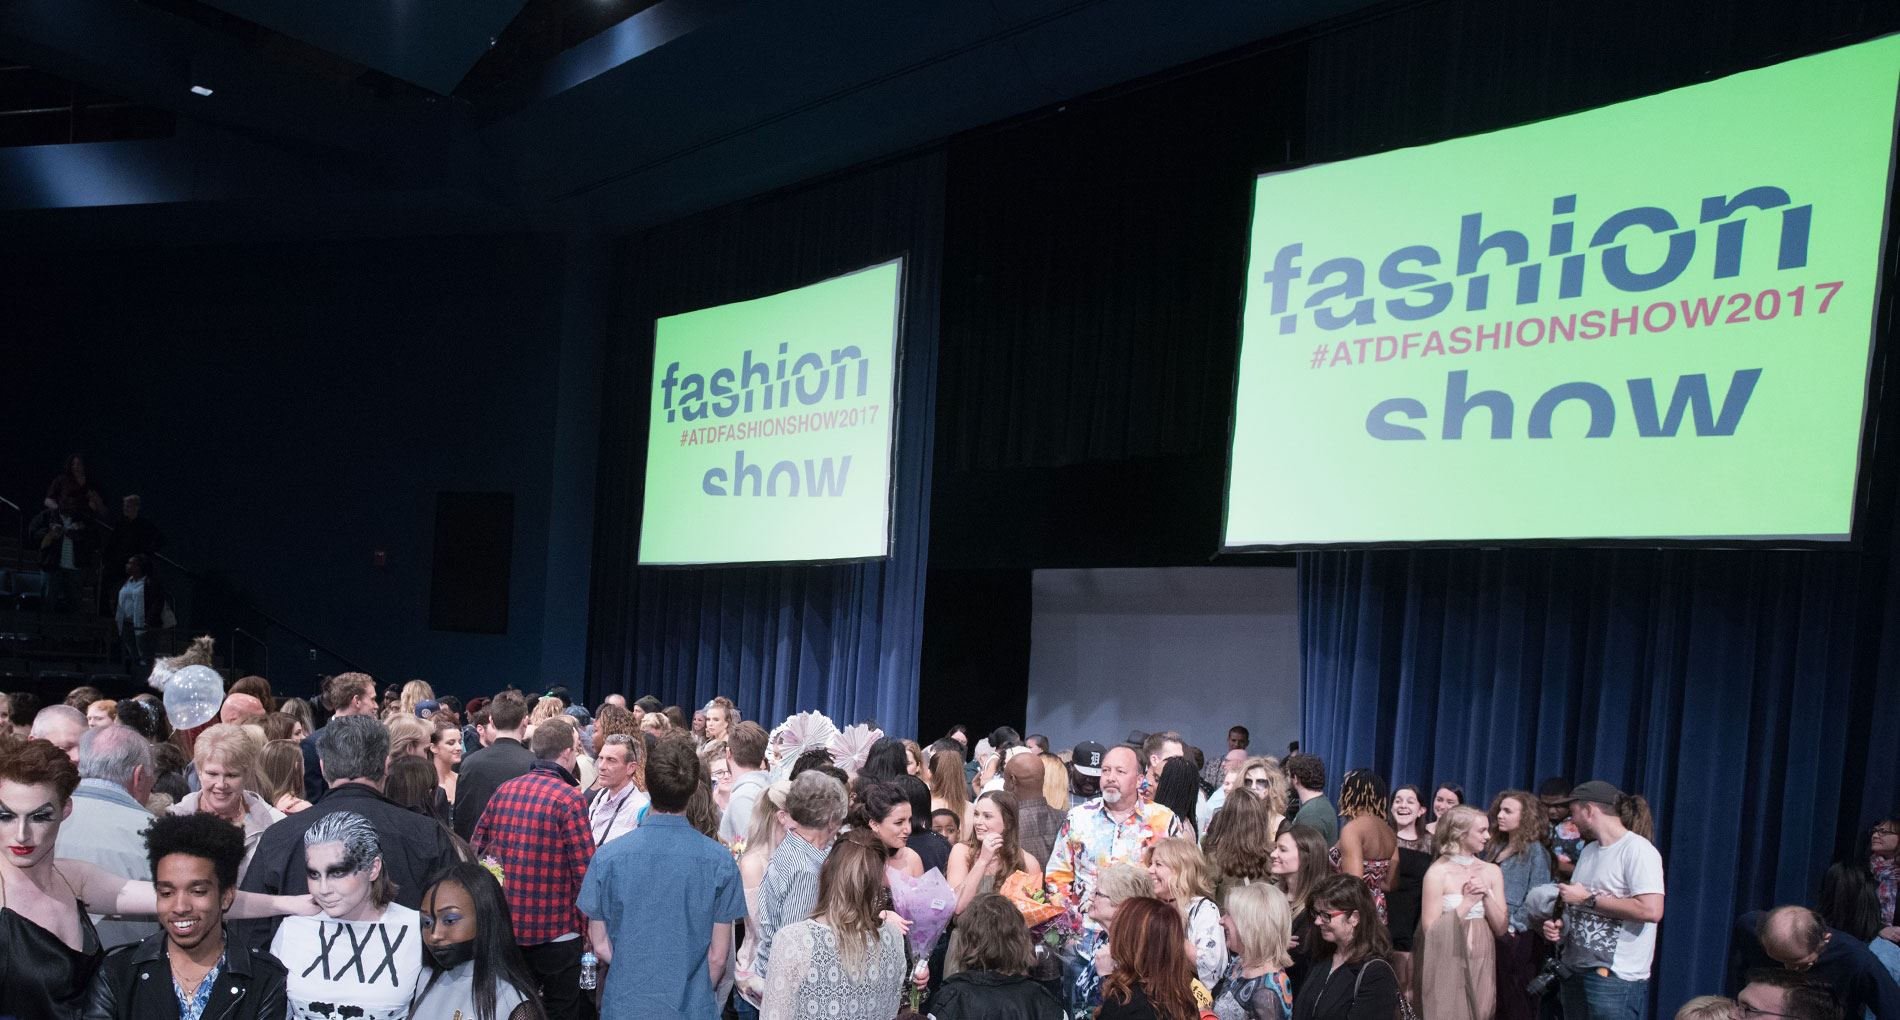 Students Gain Tactical Experience from ATD Fashion Show